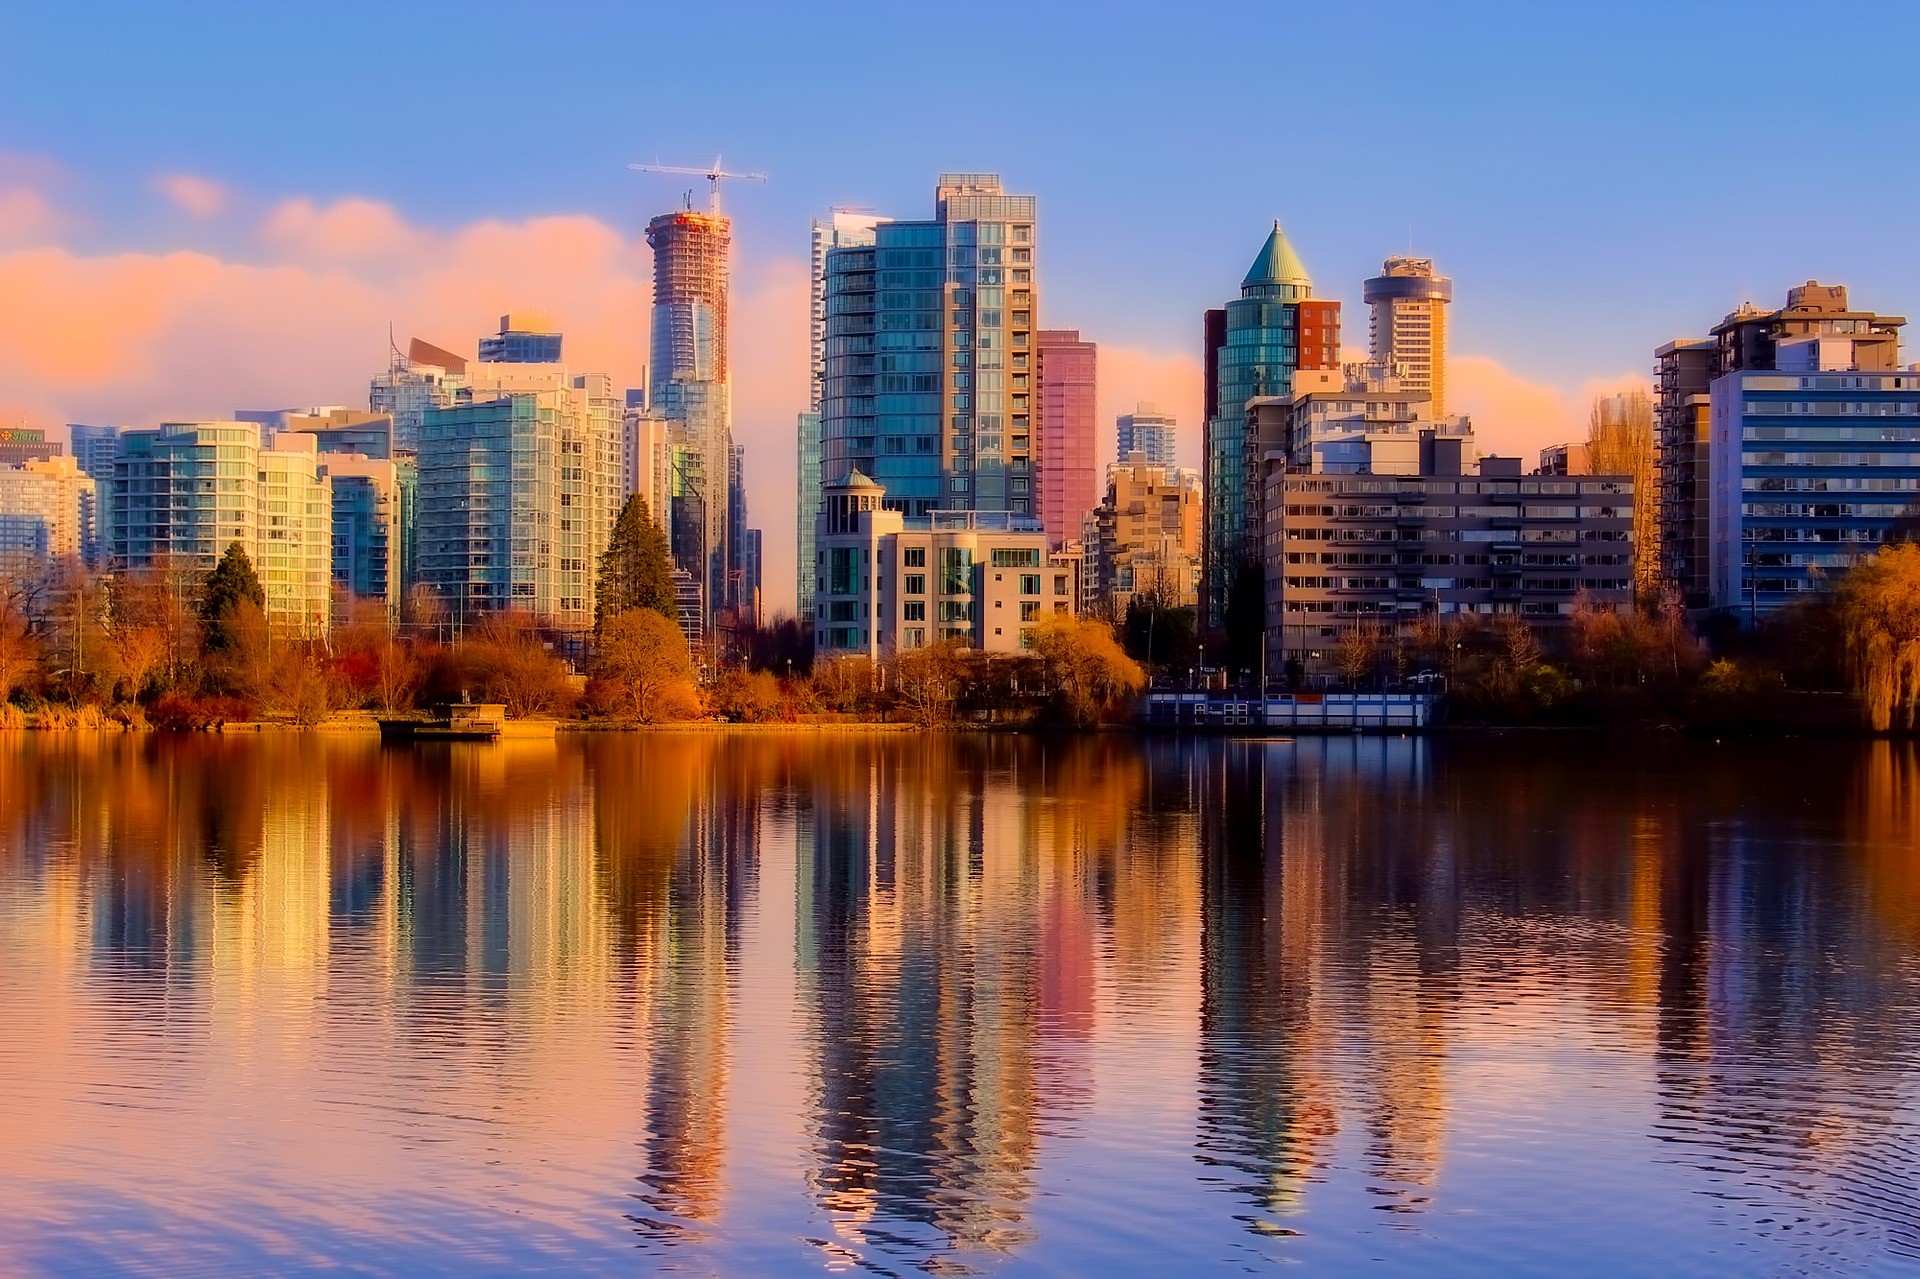 a view of the Vancouver, British Columbia skyline at dusk